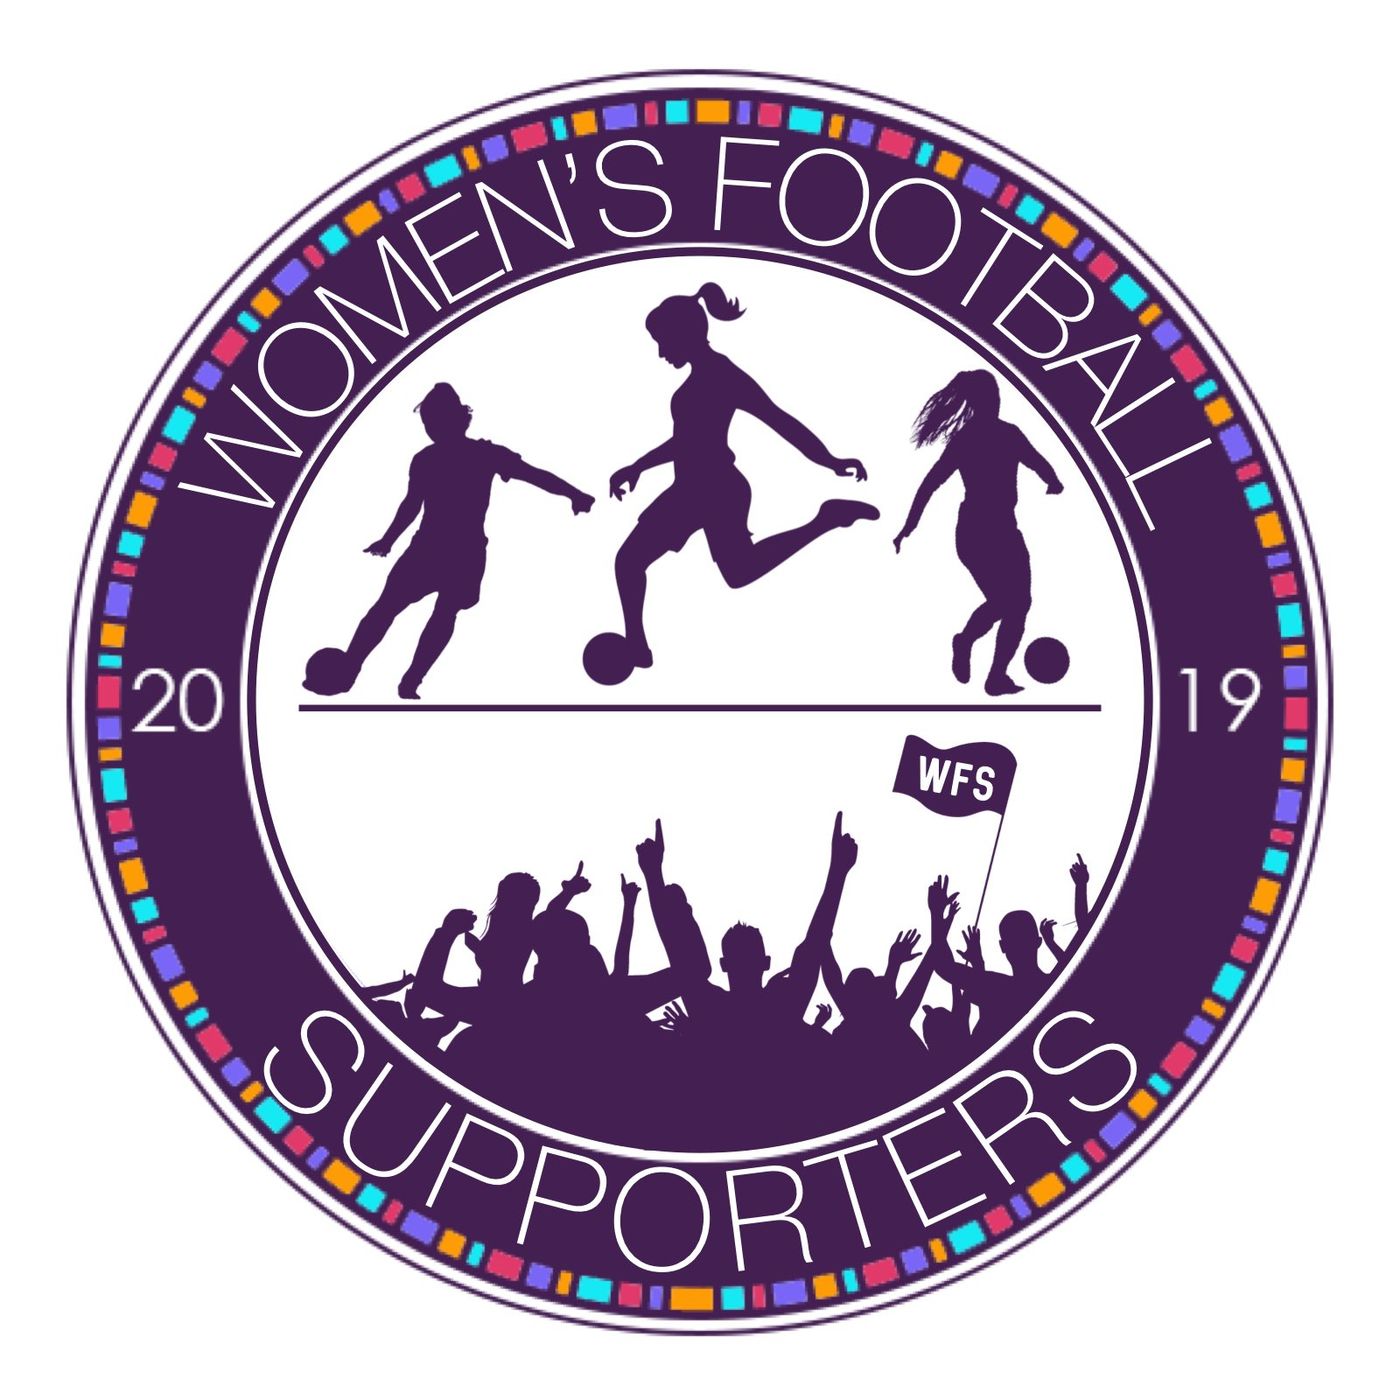 Women's Football Supporters Podcast